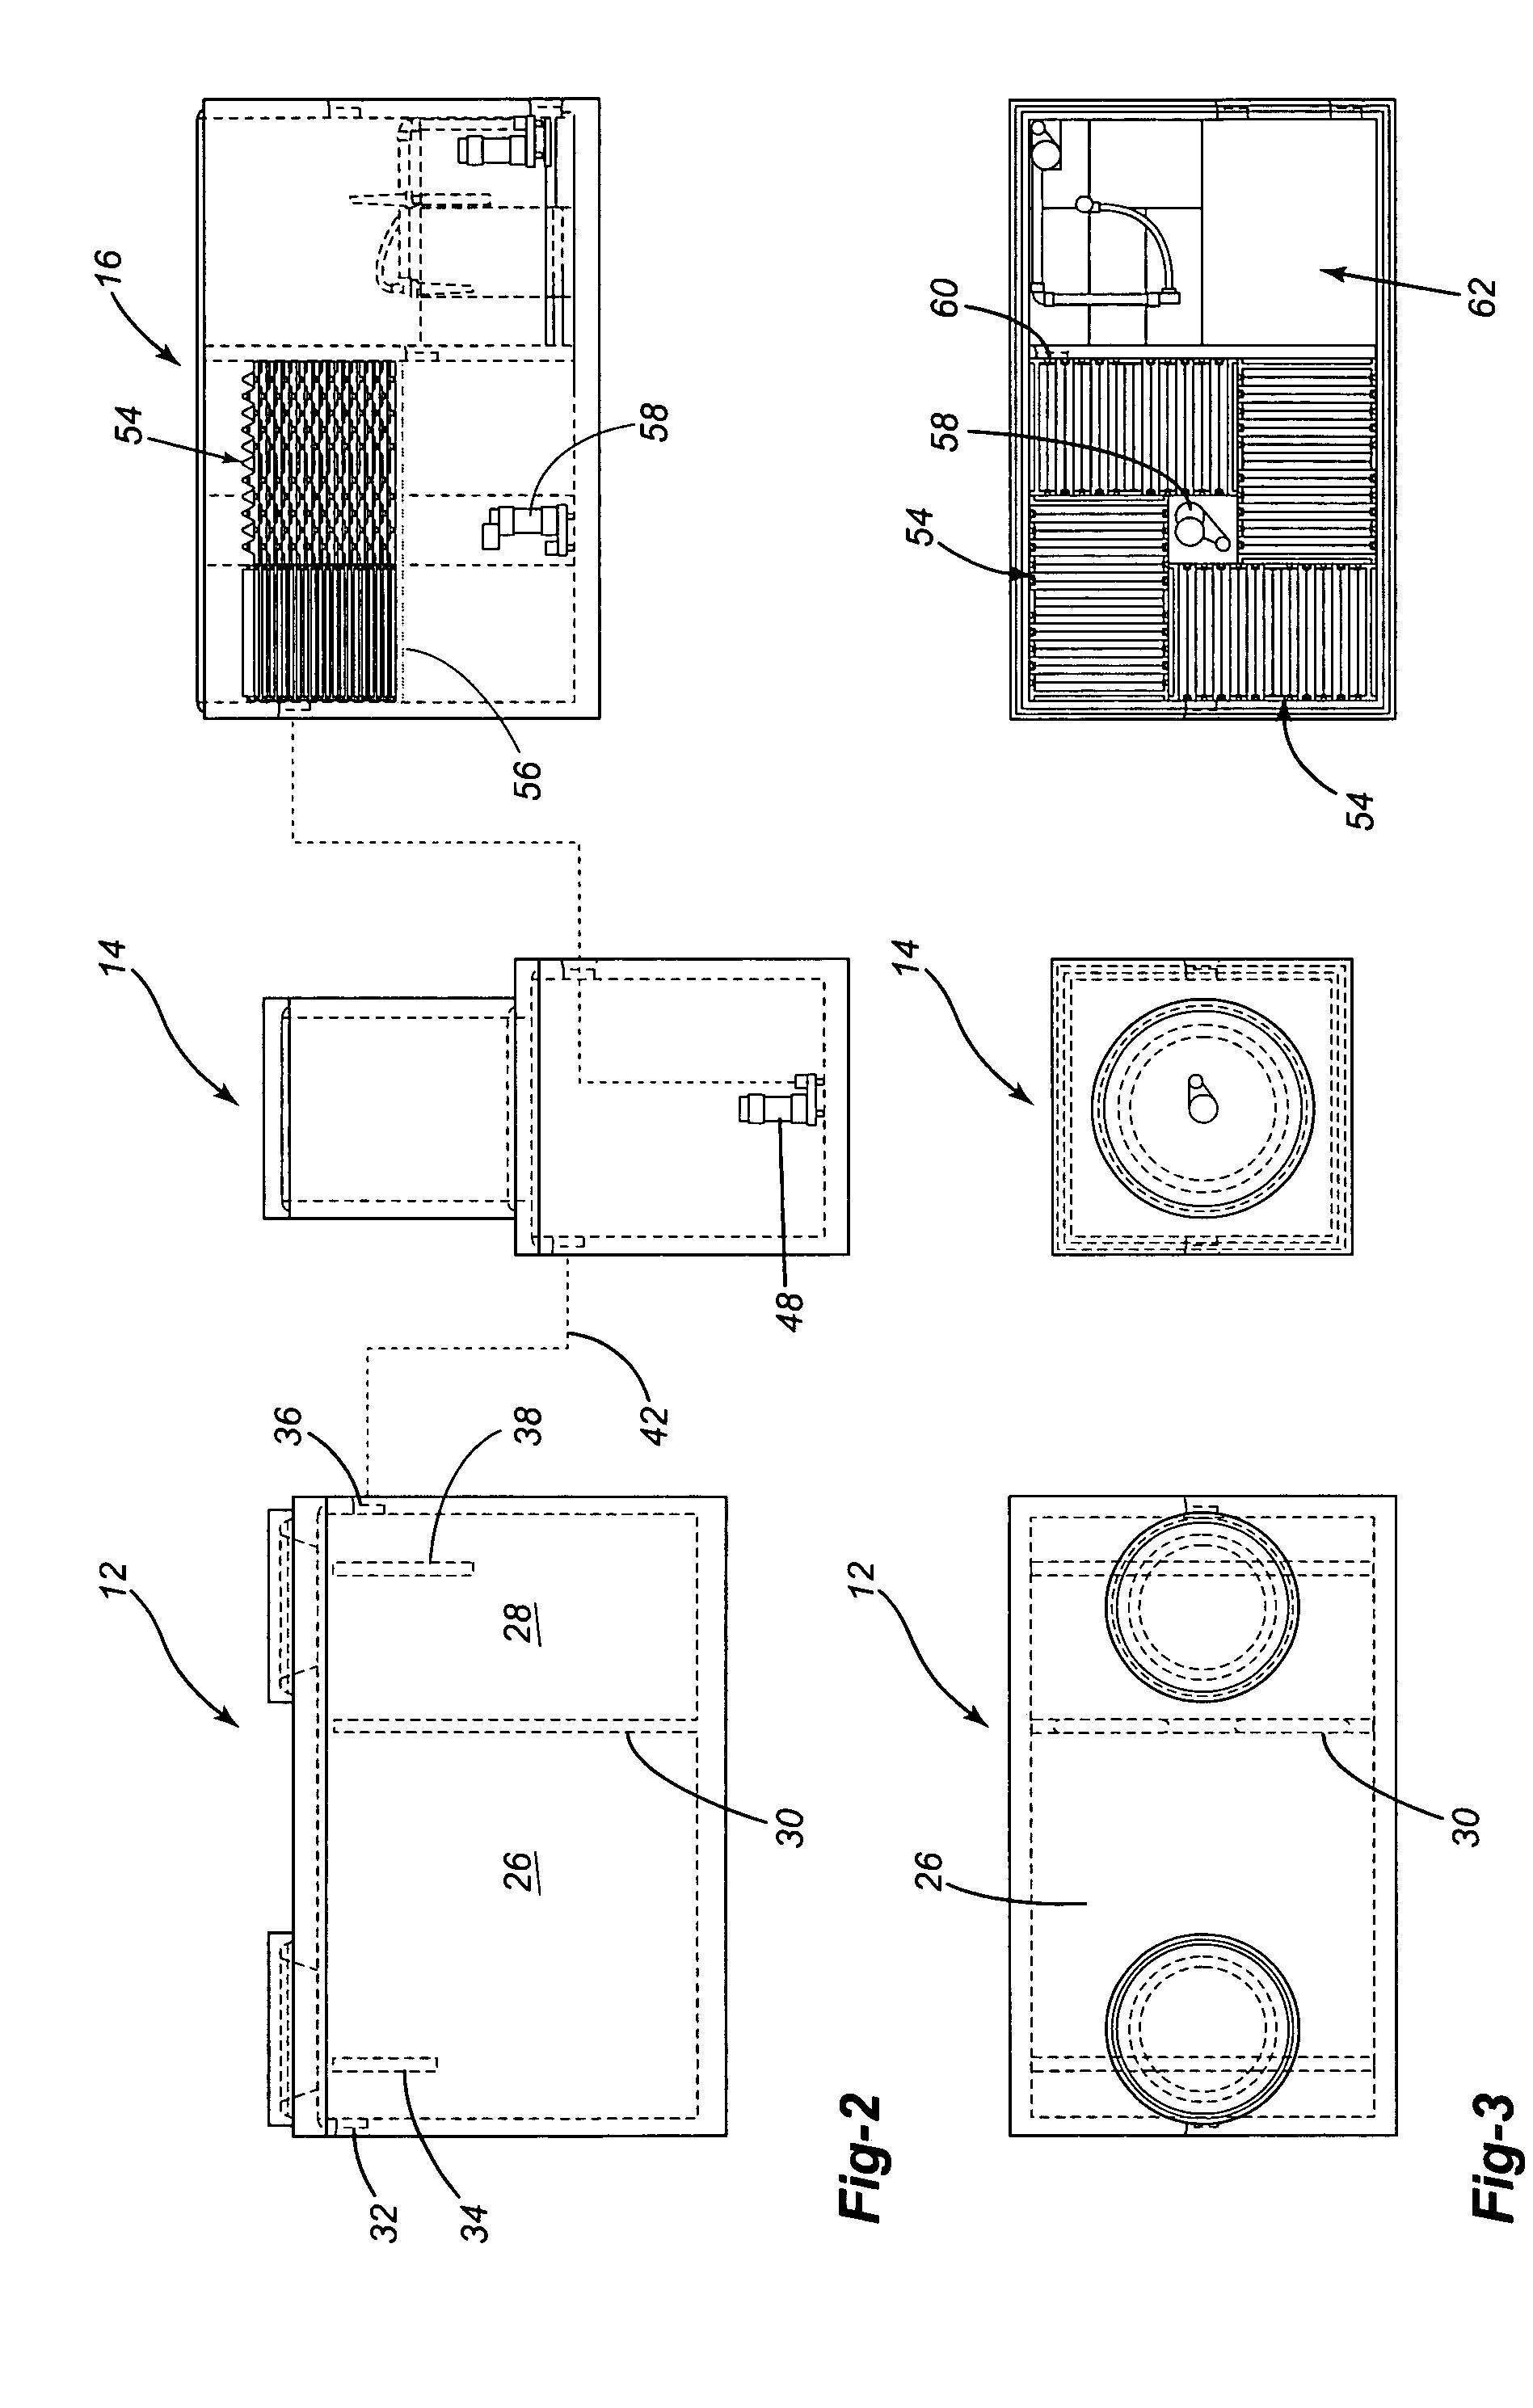 Used water treatment system for residences and the like